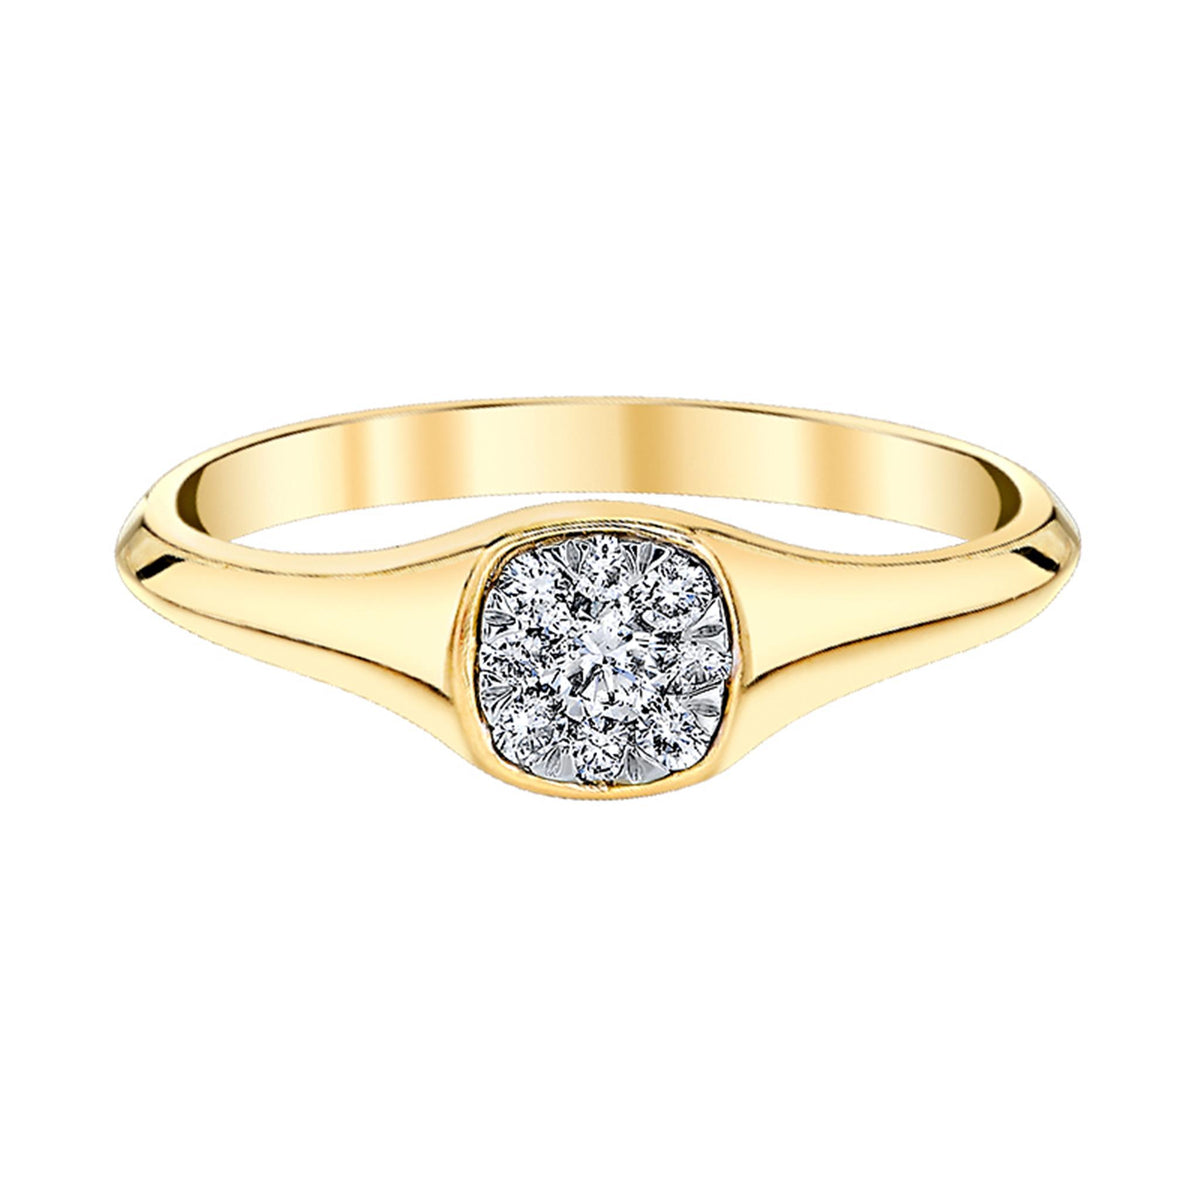 10Kt Yellow Gold Signet-Style  Ring With 0.15cttw Natural Diamonds